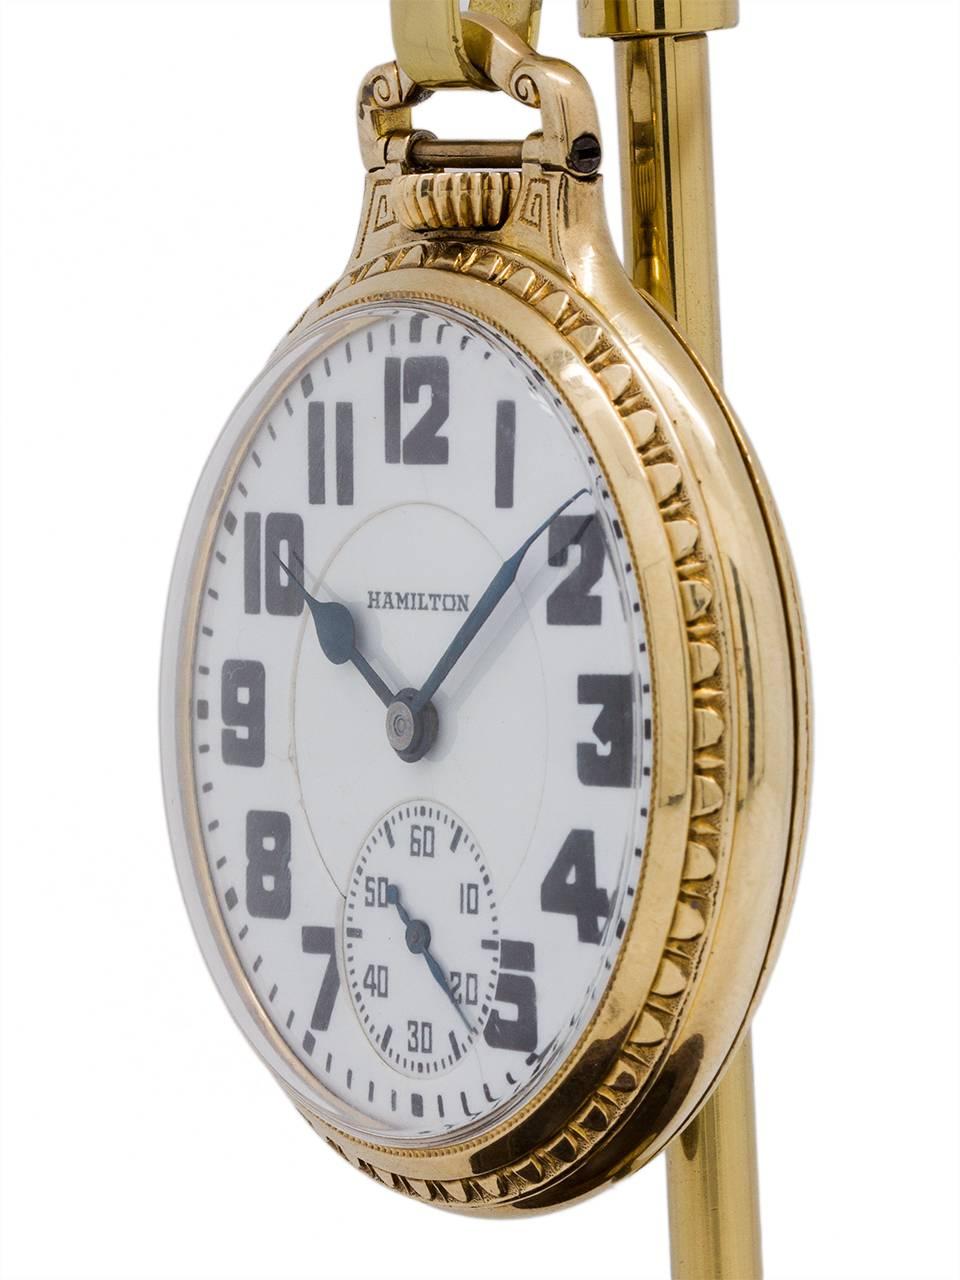 
Hamilton Railroad pocket watch grade 992 movement serial # 2.6 million circa 1936. Featuring 16 size 10K yellow gold filled open face case in very nice condition. With very pleasing “double sunk” white enamel dial with bold block style arabic